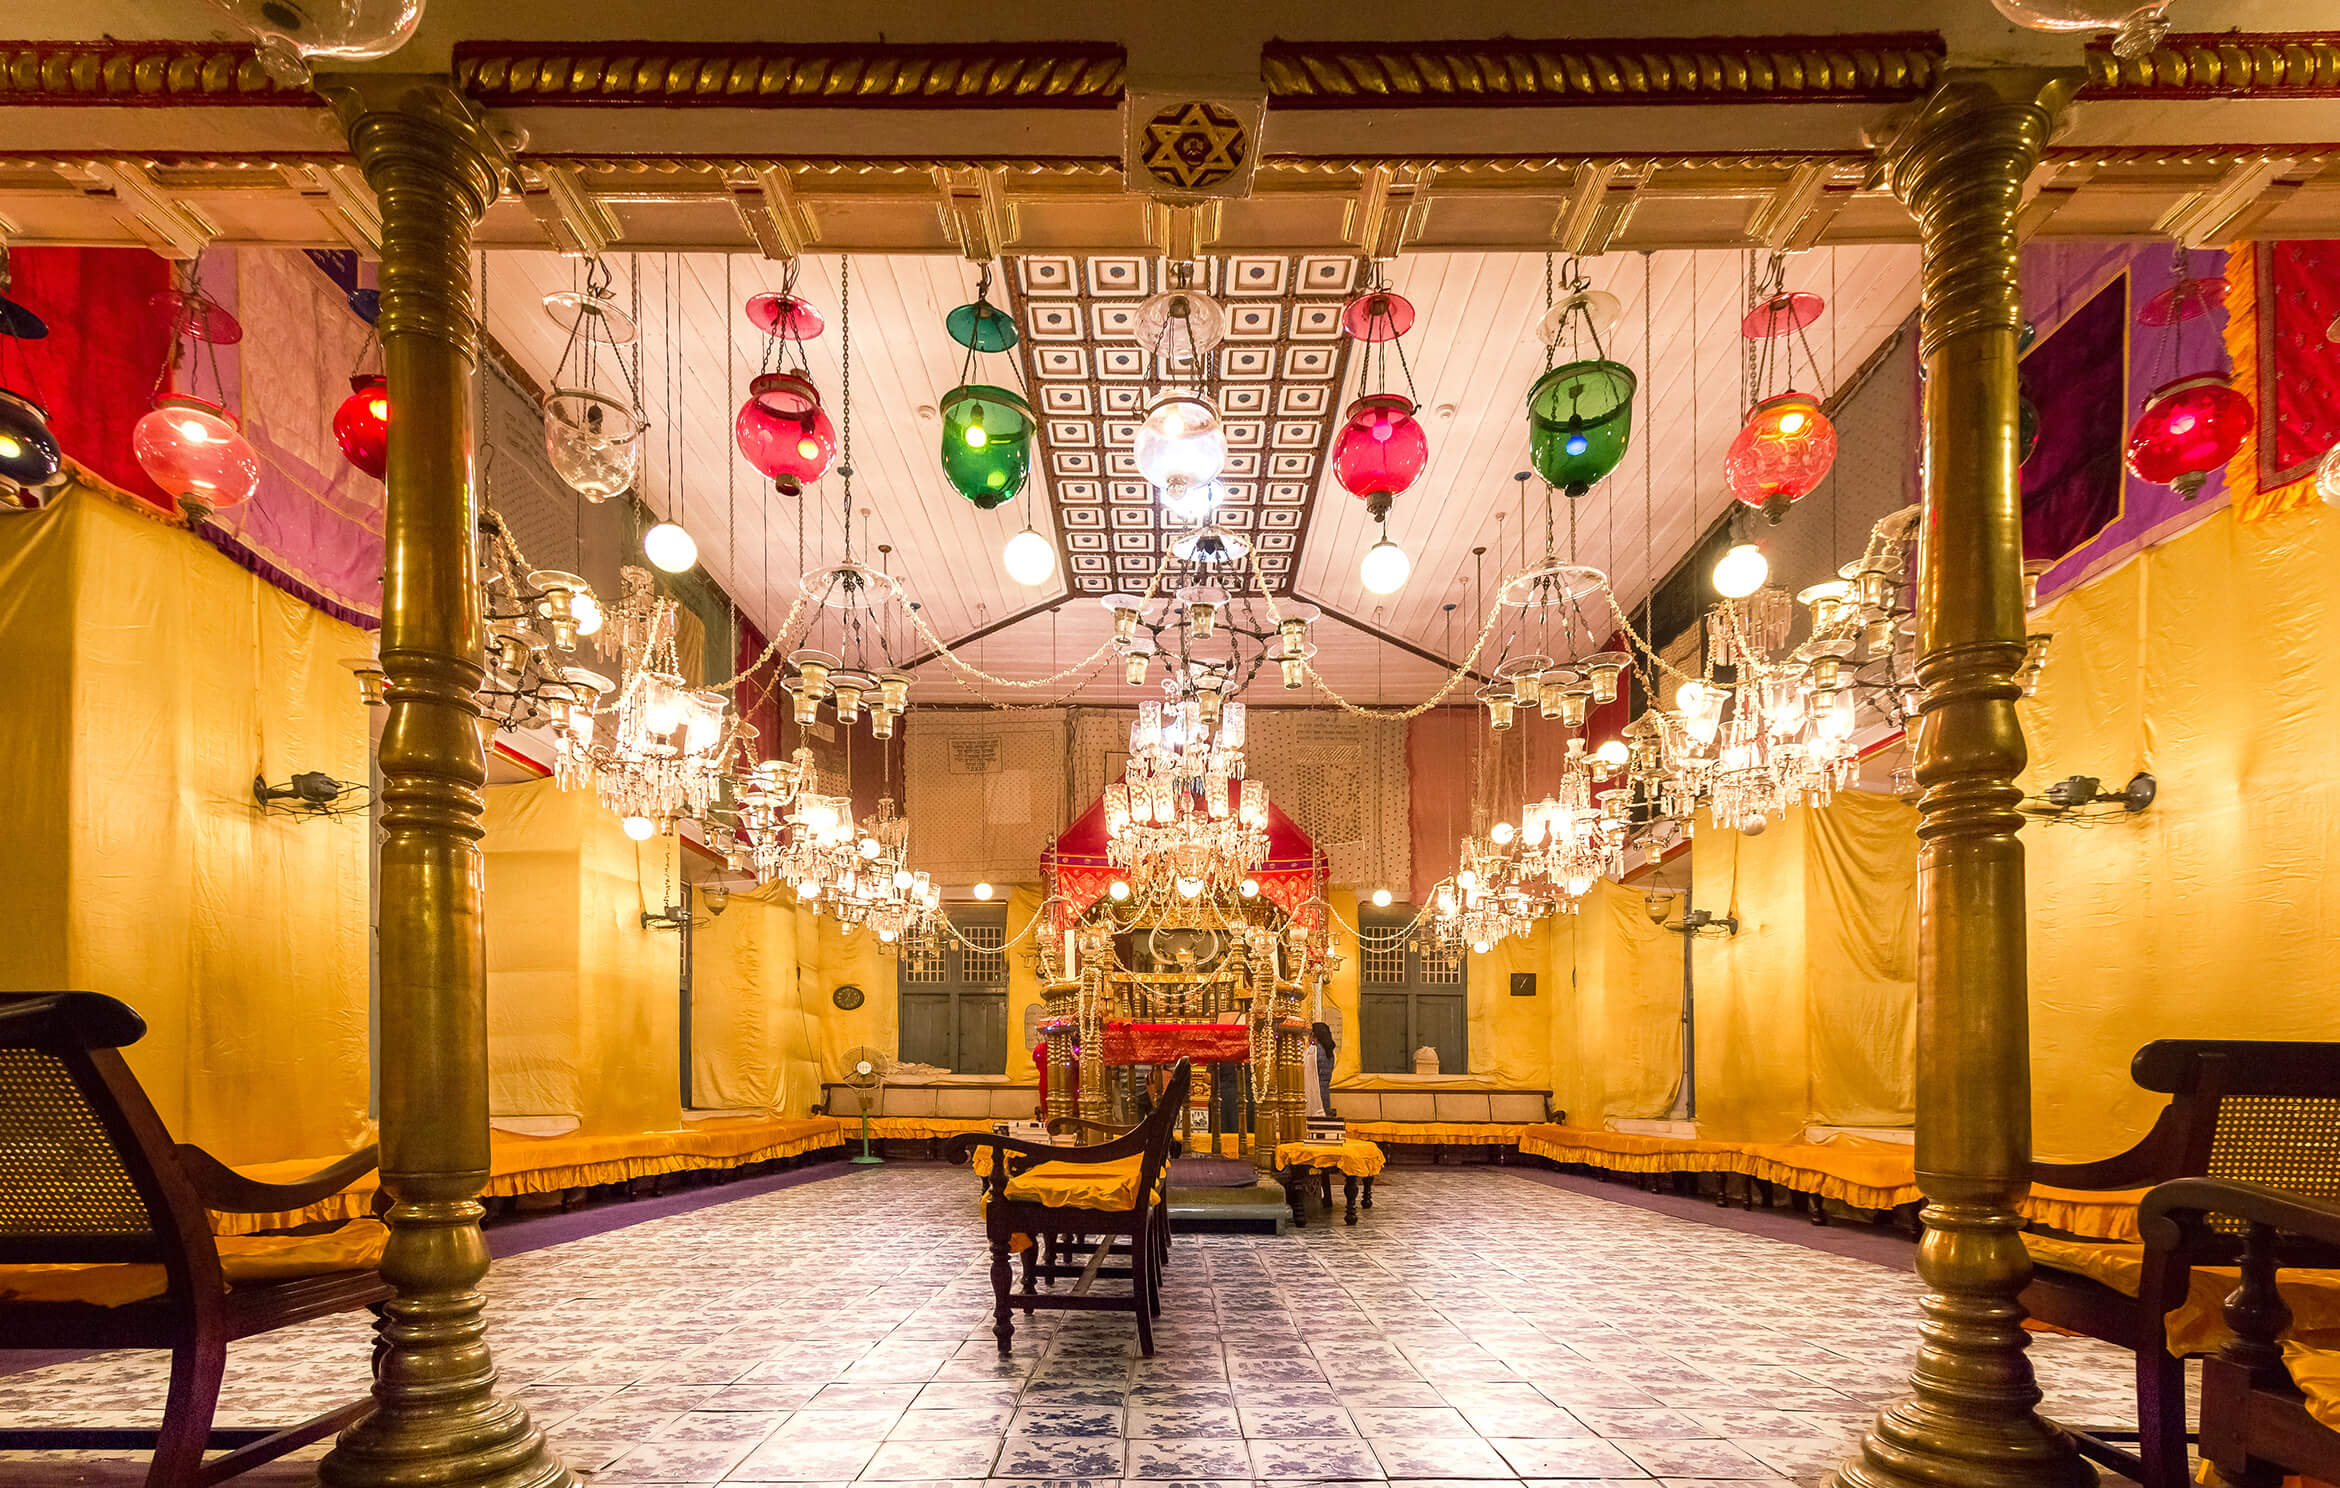 A JEWISH AUTUMN IN KOCHI -The bright and lustrous interior of Paradesi Synagogue on Shmini days.